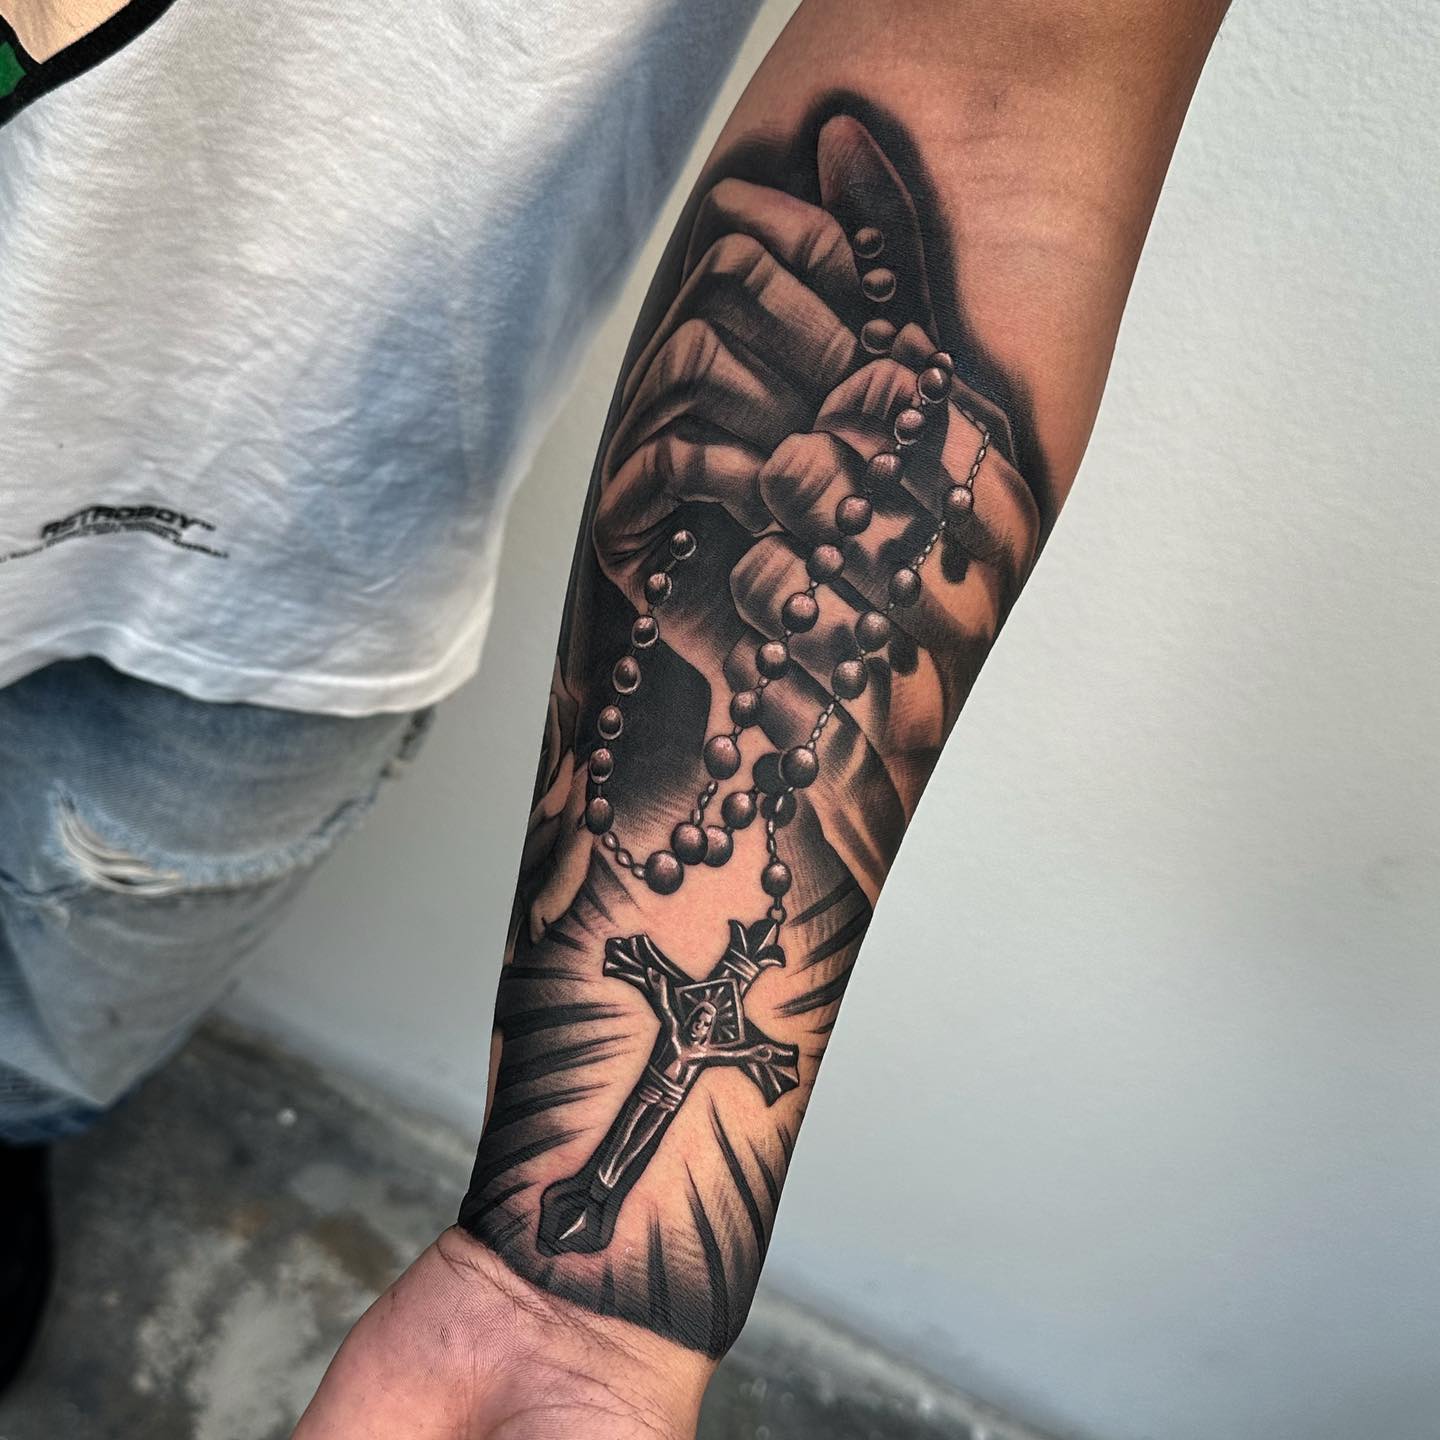 26 Forearm Tattoo Ideas For Men And Their Meanings | by Tritattoos | Medium